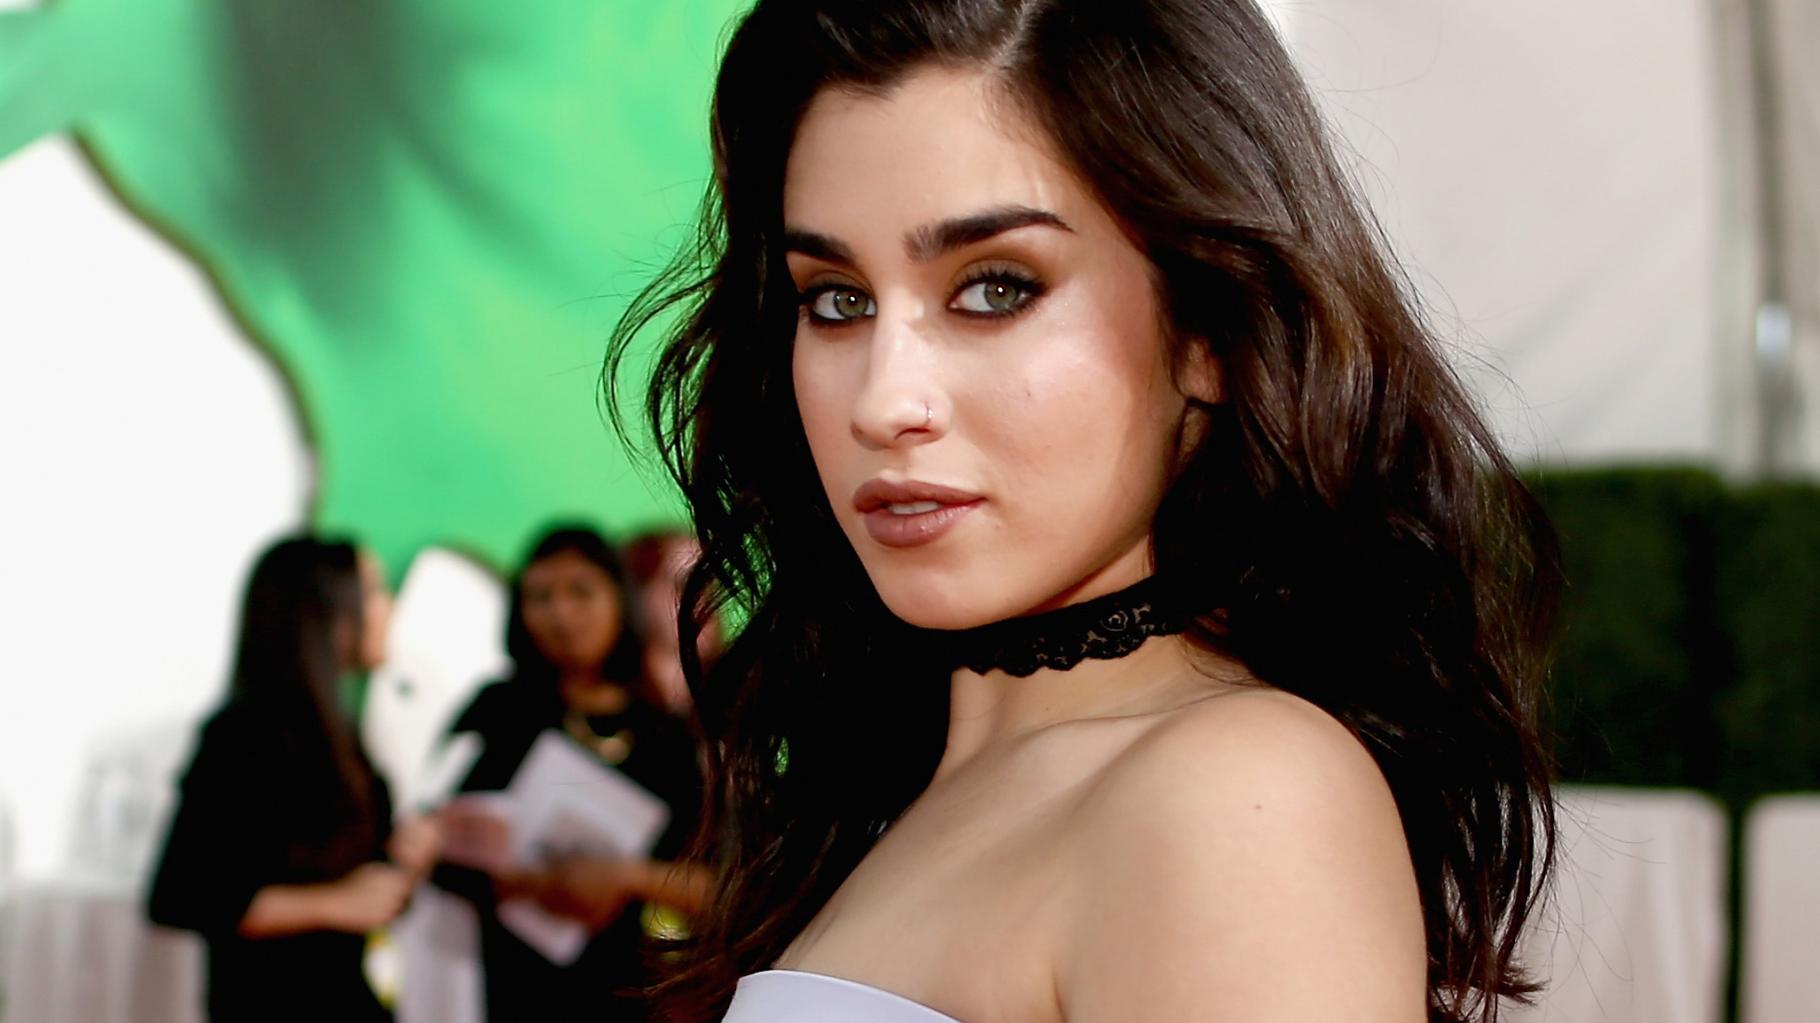 Fifth Harmony's Lauren Jauregui Comes Out as Bisexual, Stands Up to Trump Supporters' 'Hatred'